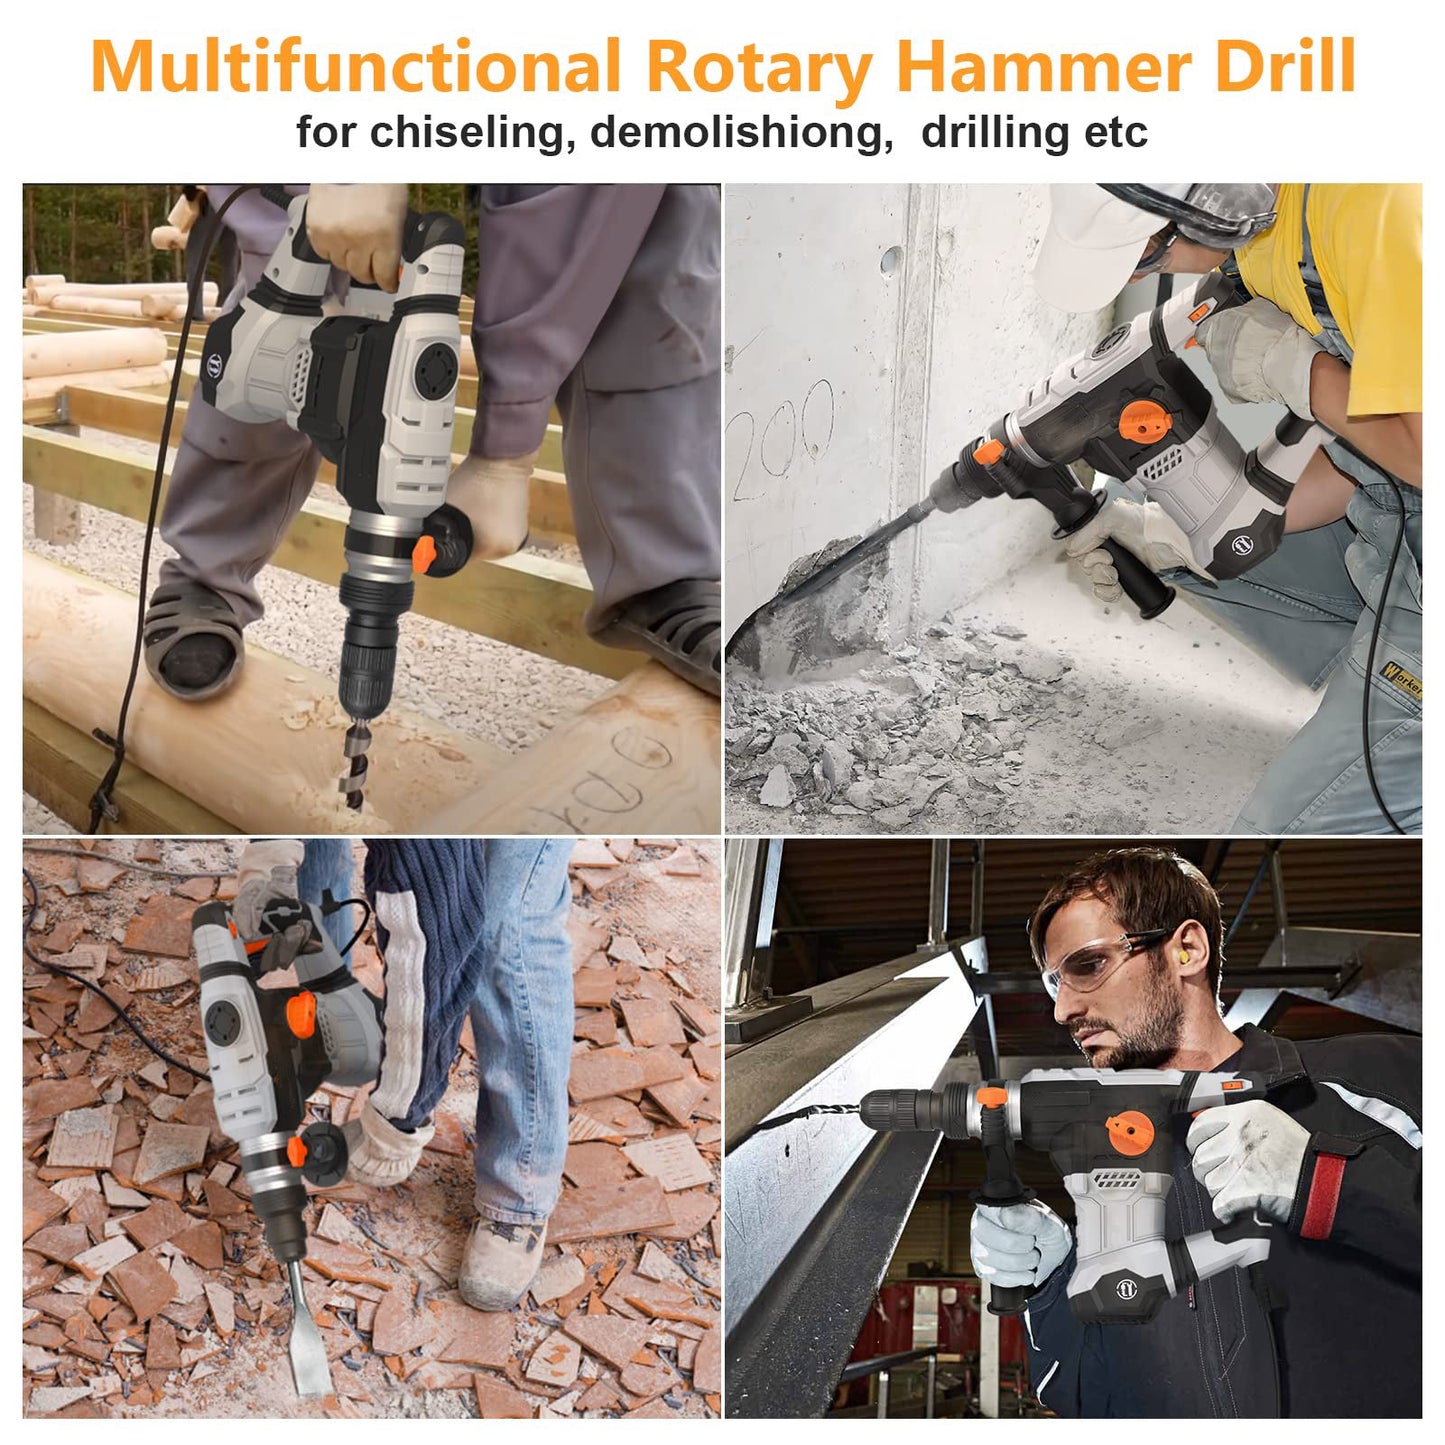 GARVEE 12.5 Amp Rotary Hammer Drill 1-1/4 Inch SDS-Plus 4 In 1 Multi-functional Heavy Duty Hammer Drill